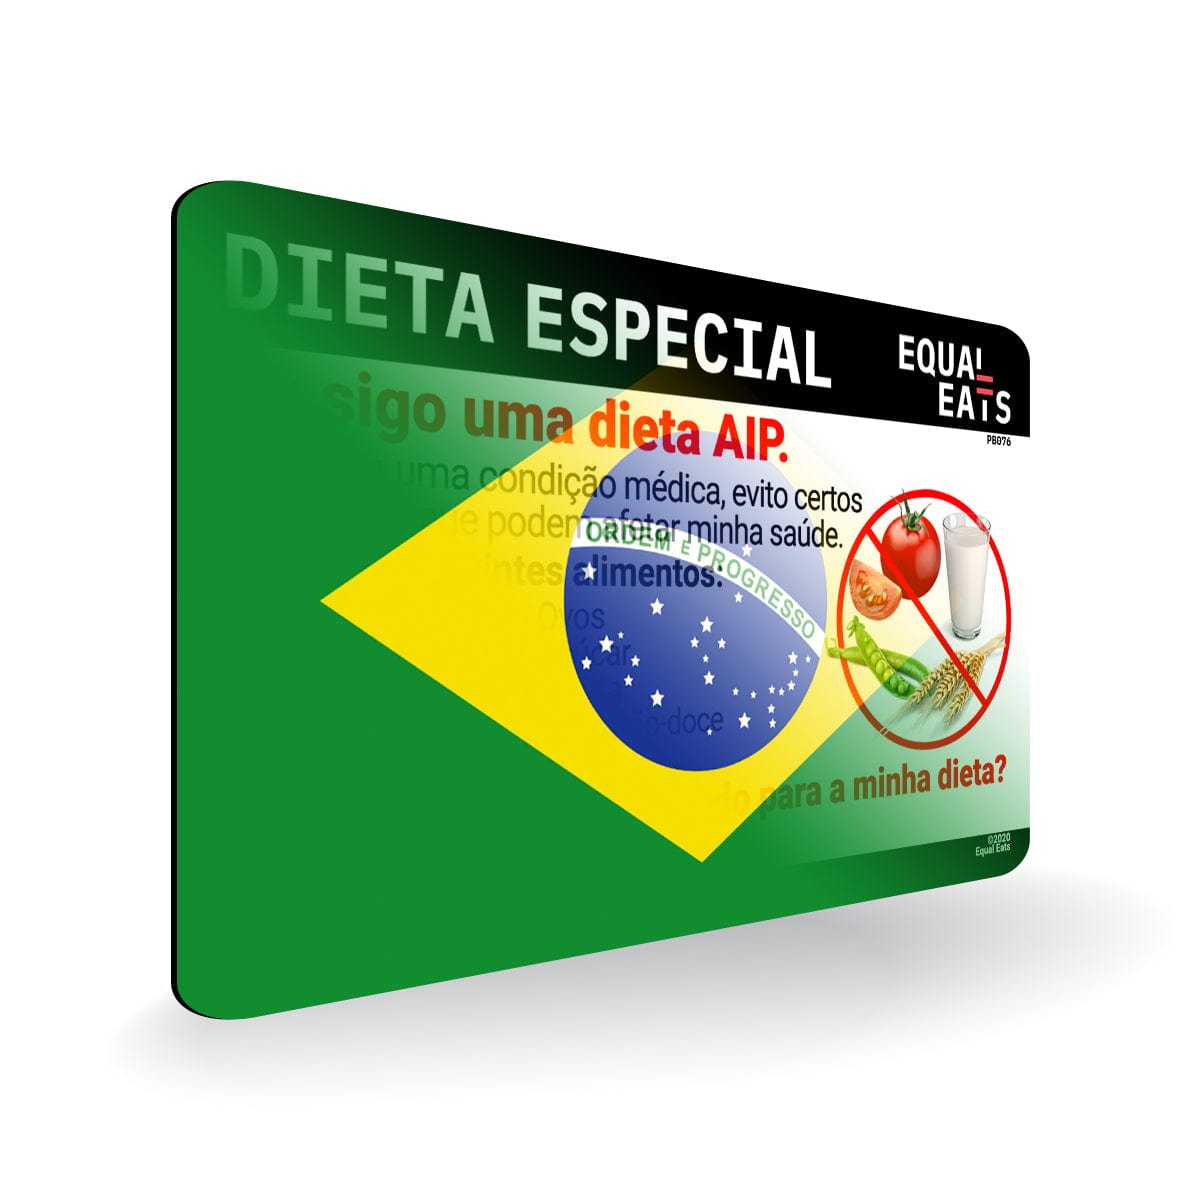 AIP Diet in Portuguese. AIP Diet Card for Brazil